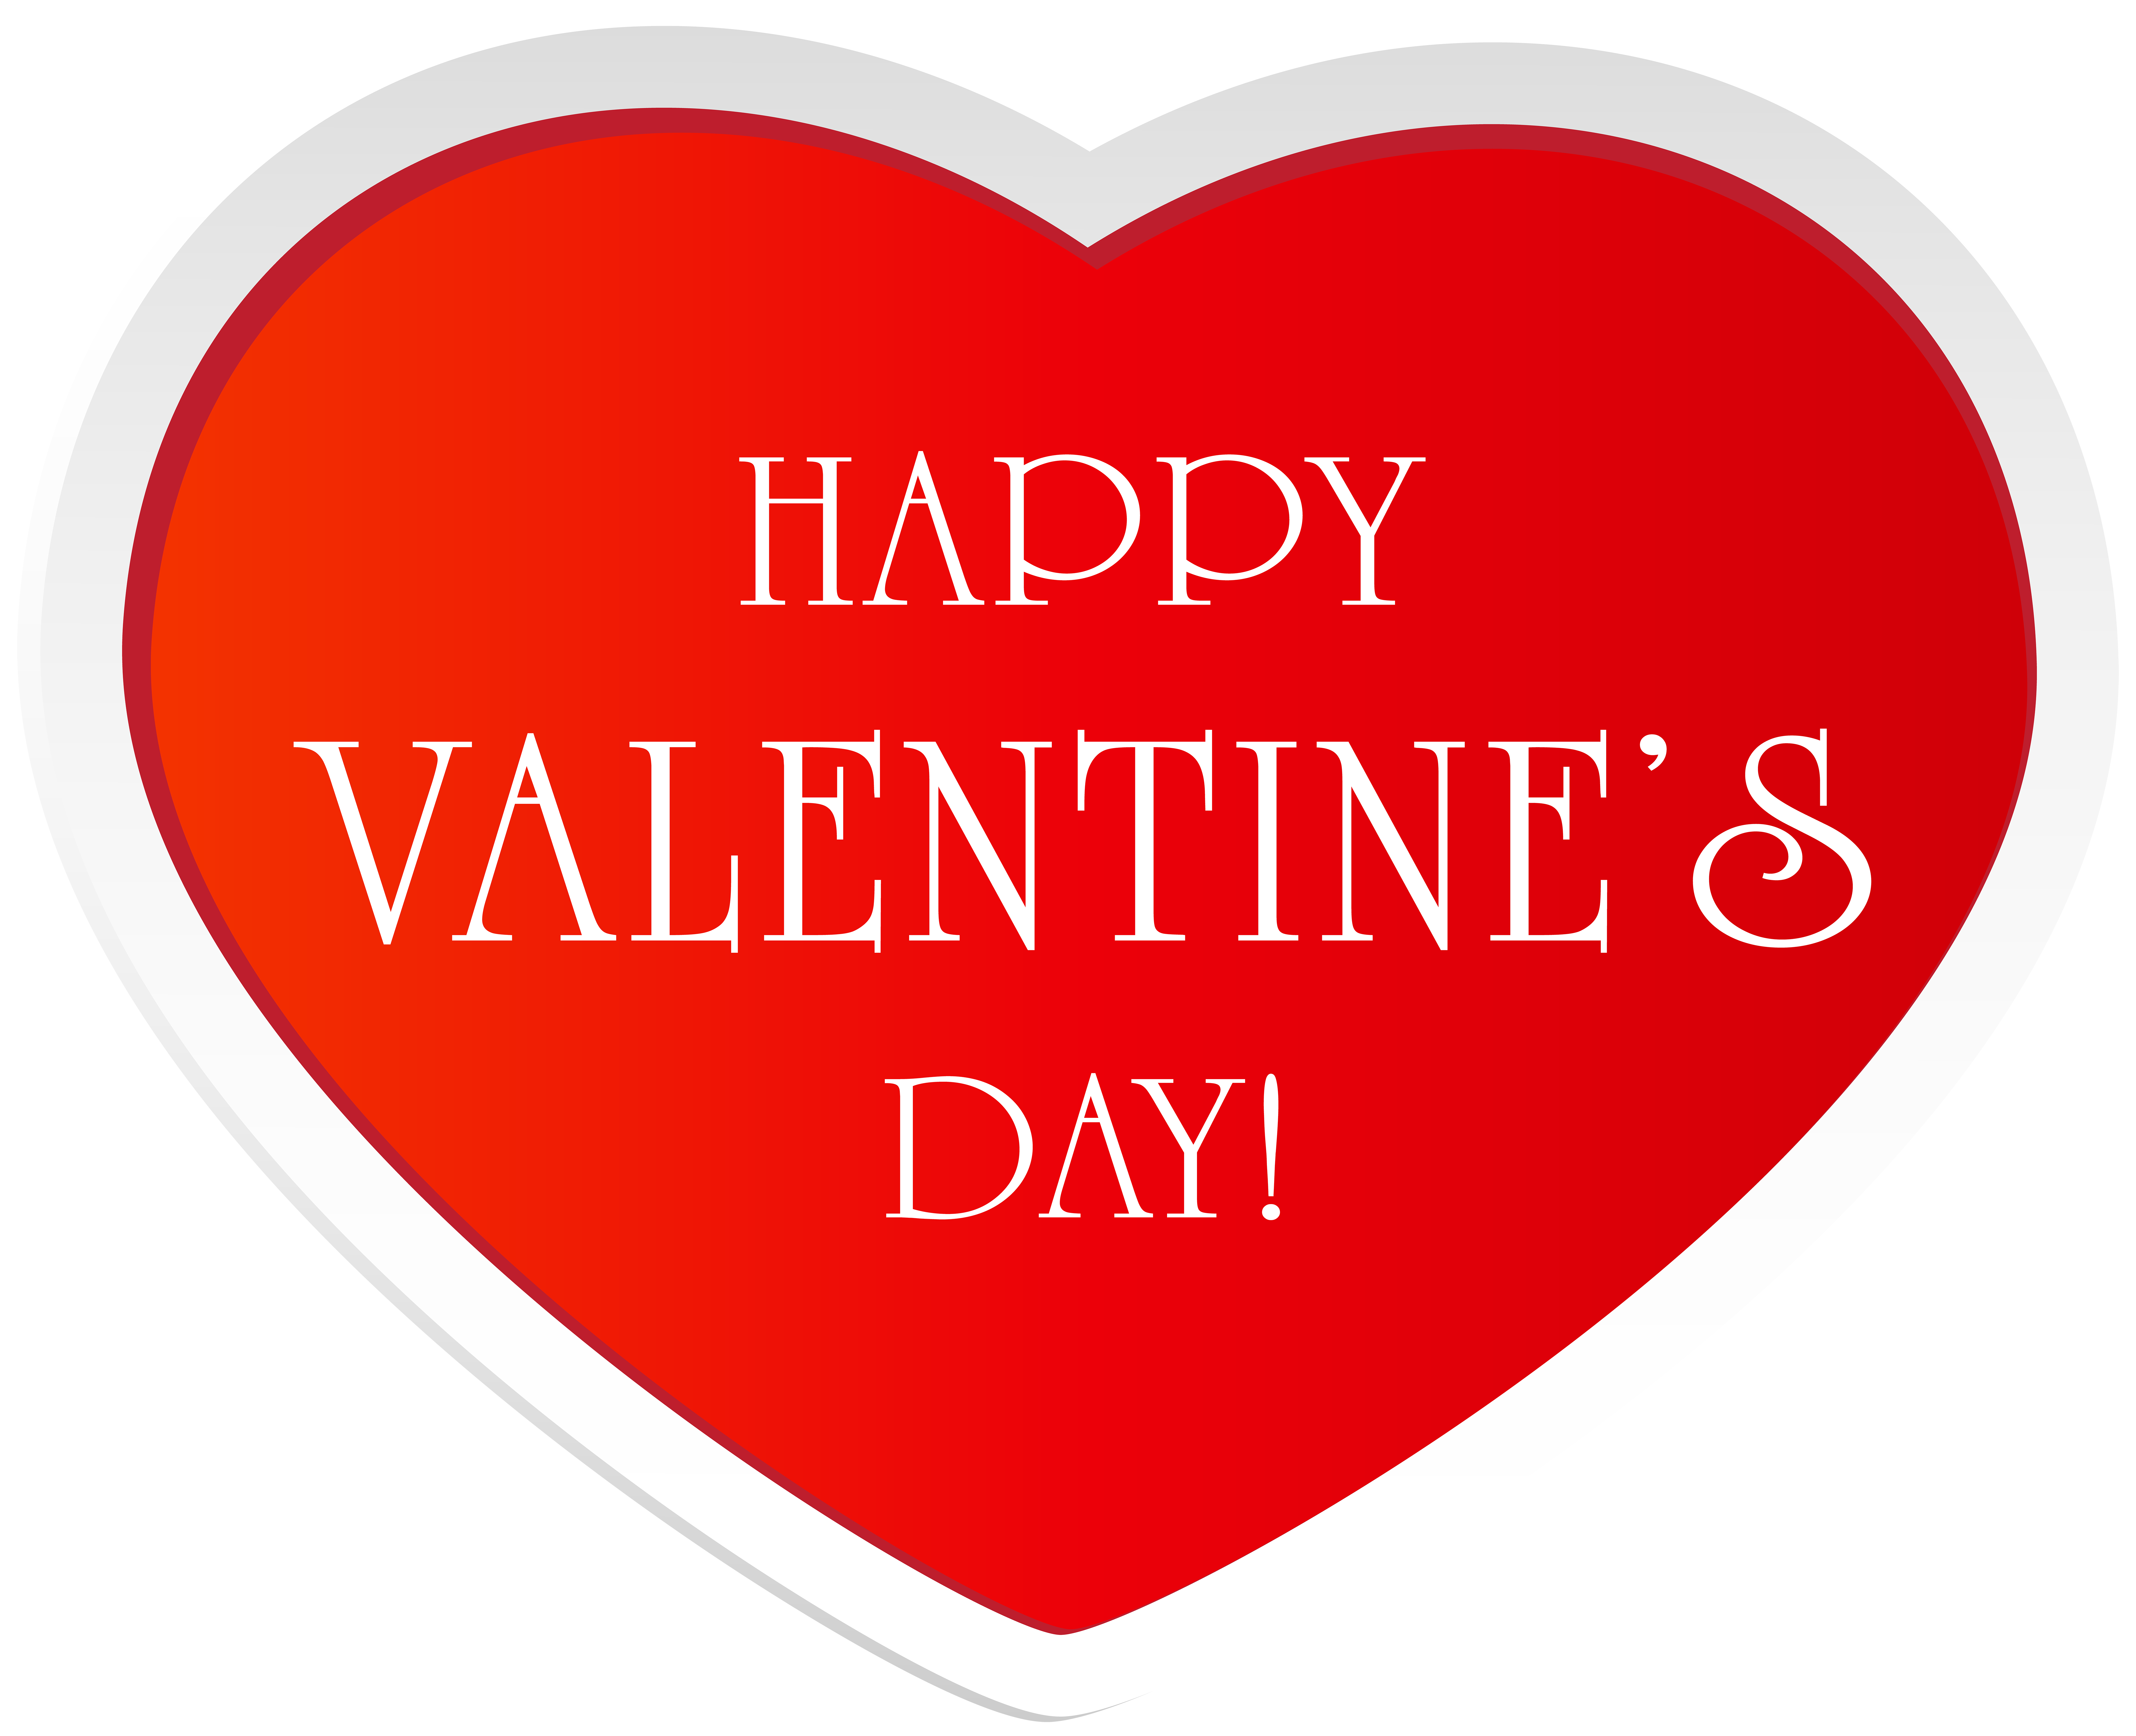 Happy Valentine's Day Red Heart Clip Art Image | Gallery Yopriceville ...